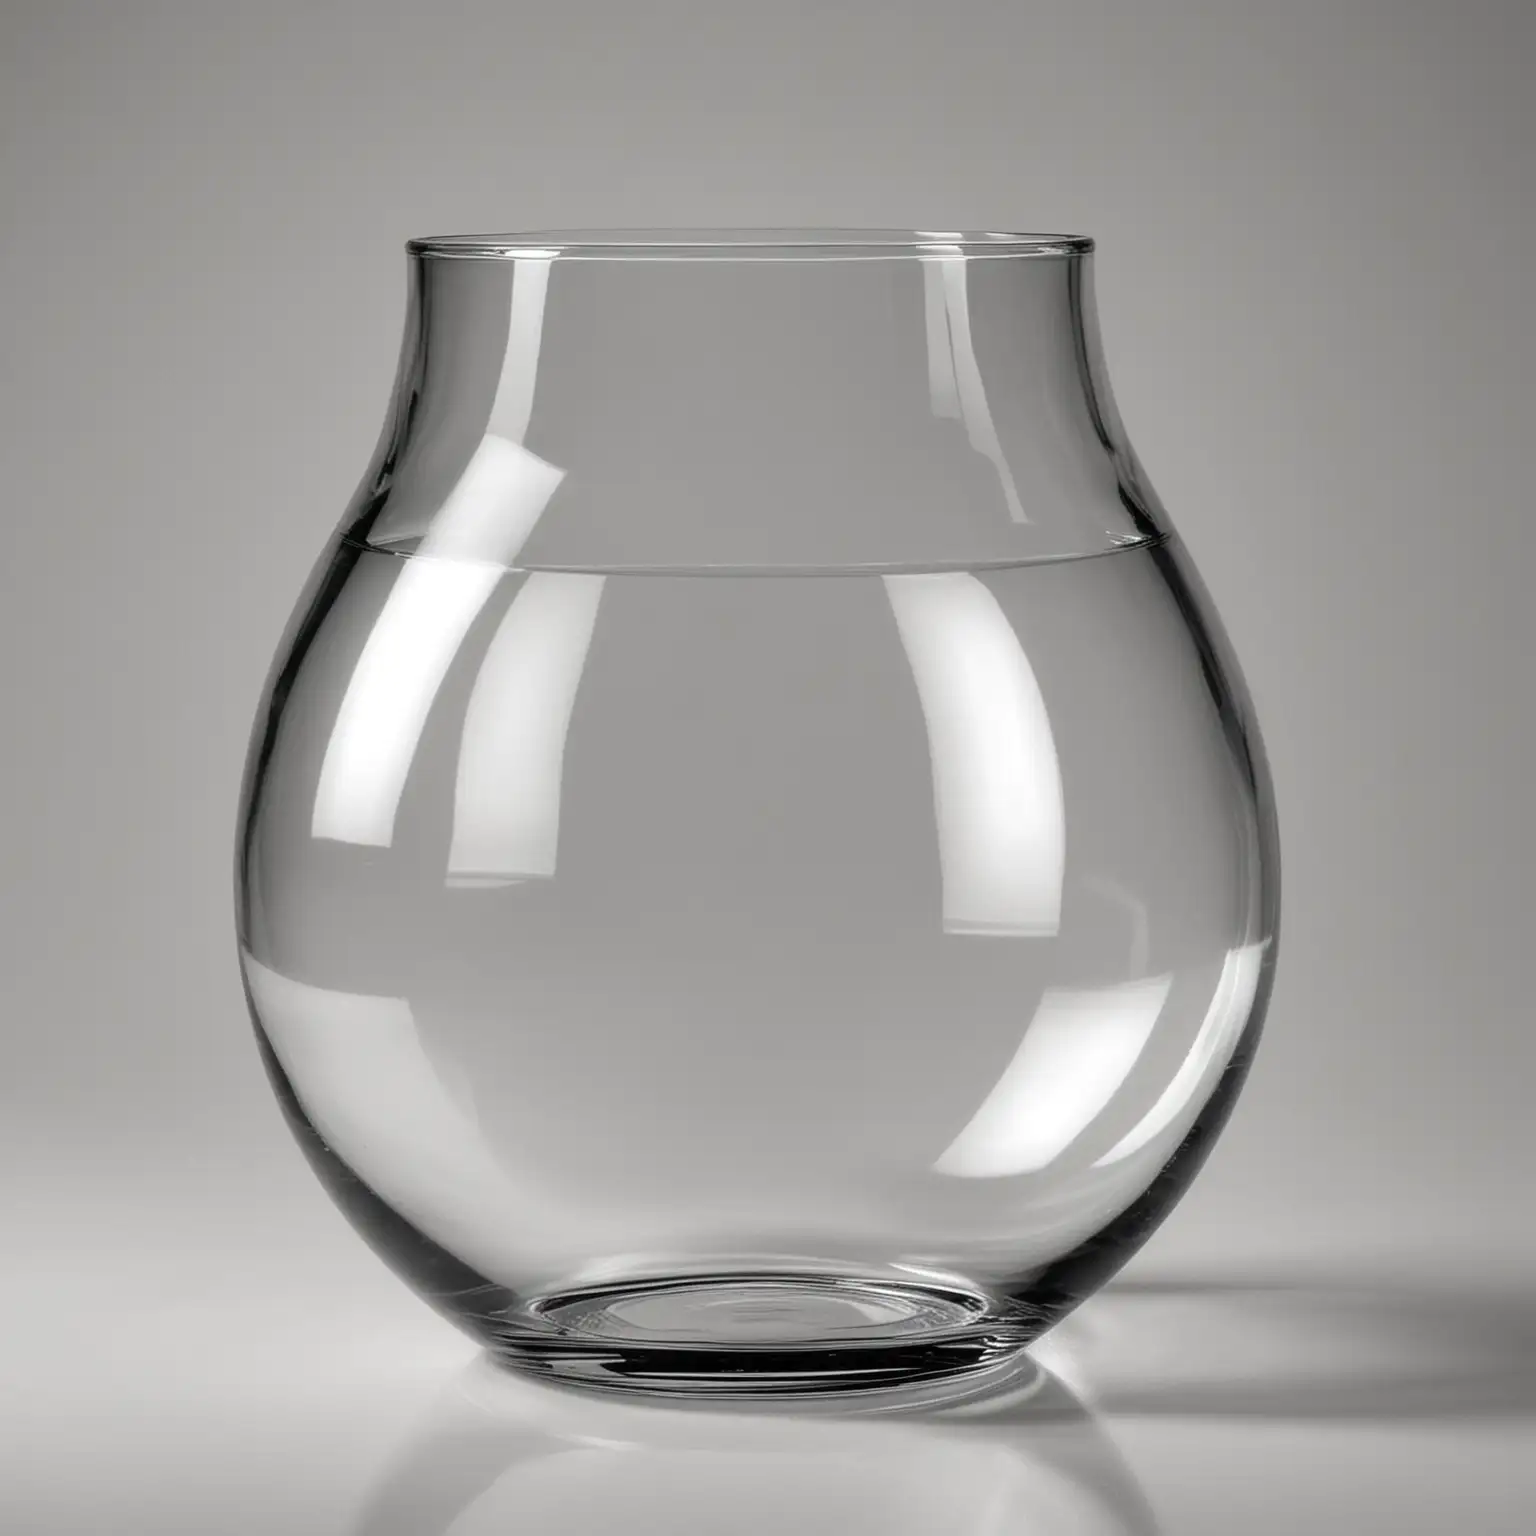 an empty, clear glass round vase with, made of nice quality with nothing inside, it is simply an image of an empty round glass vase